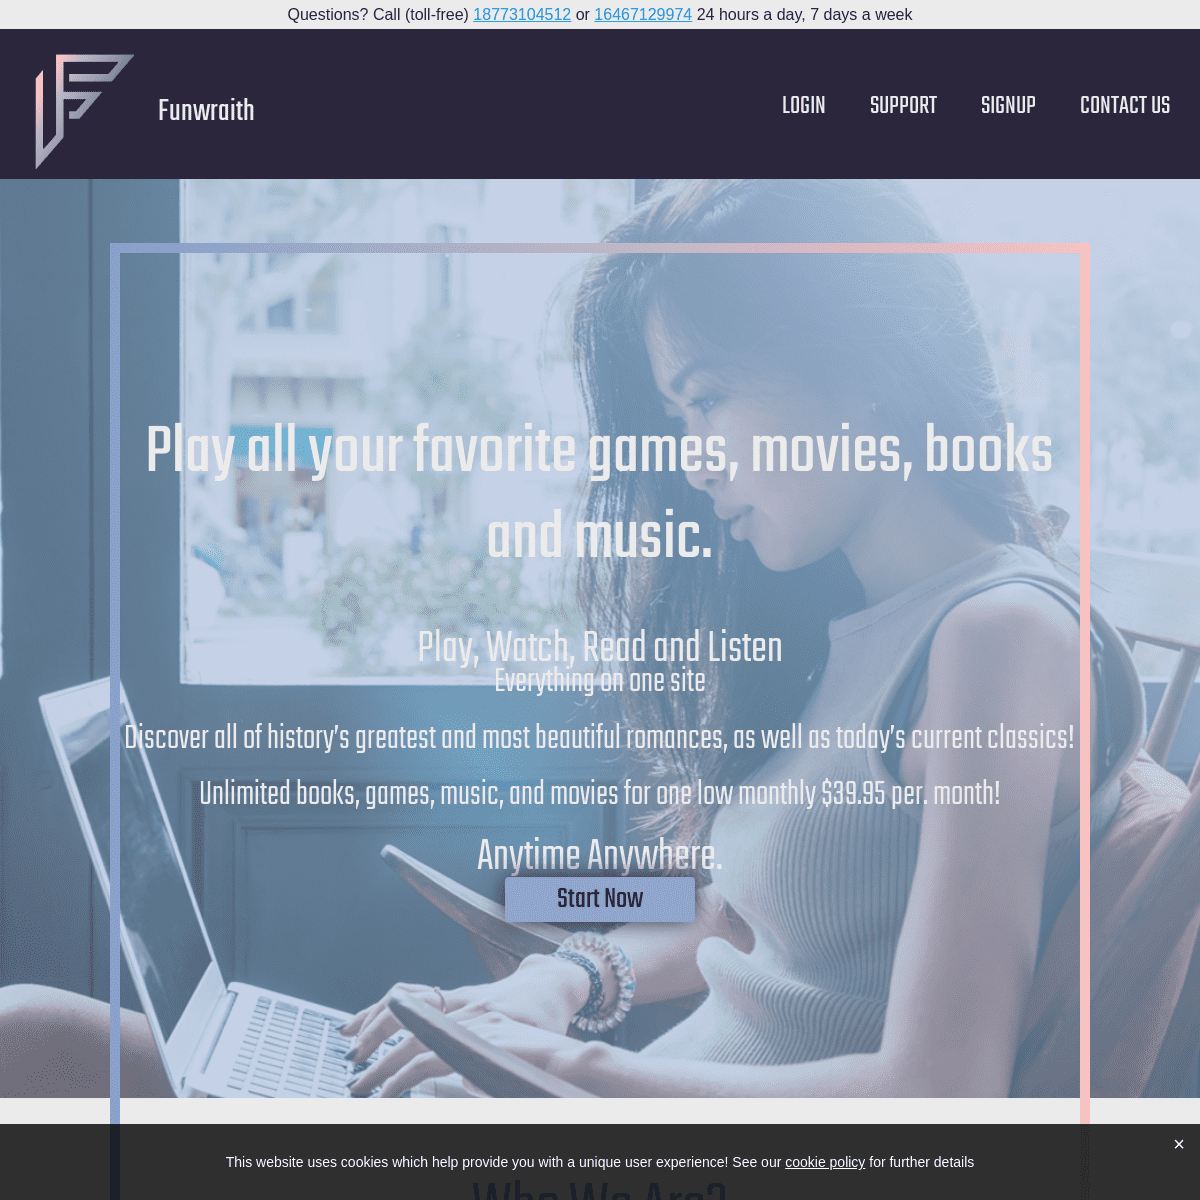 funwraith | Unlimited Movies, Games, Music and E-books